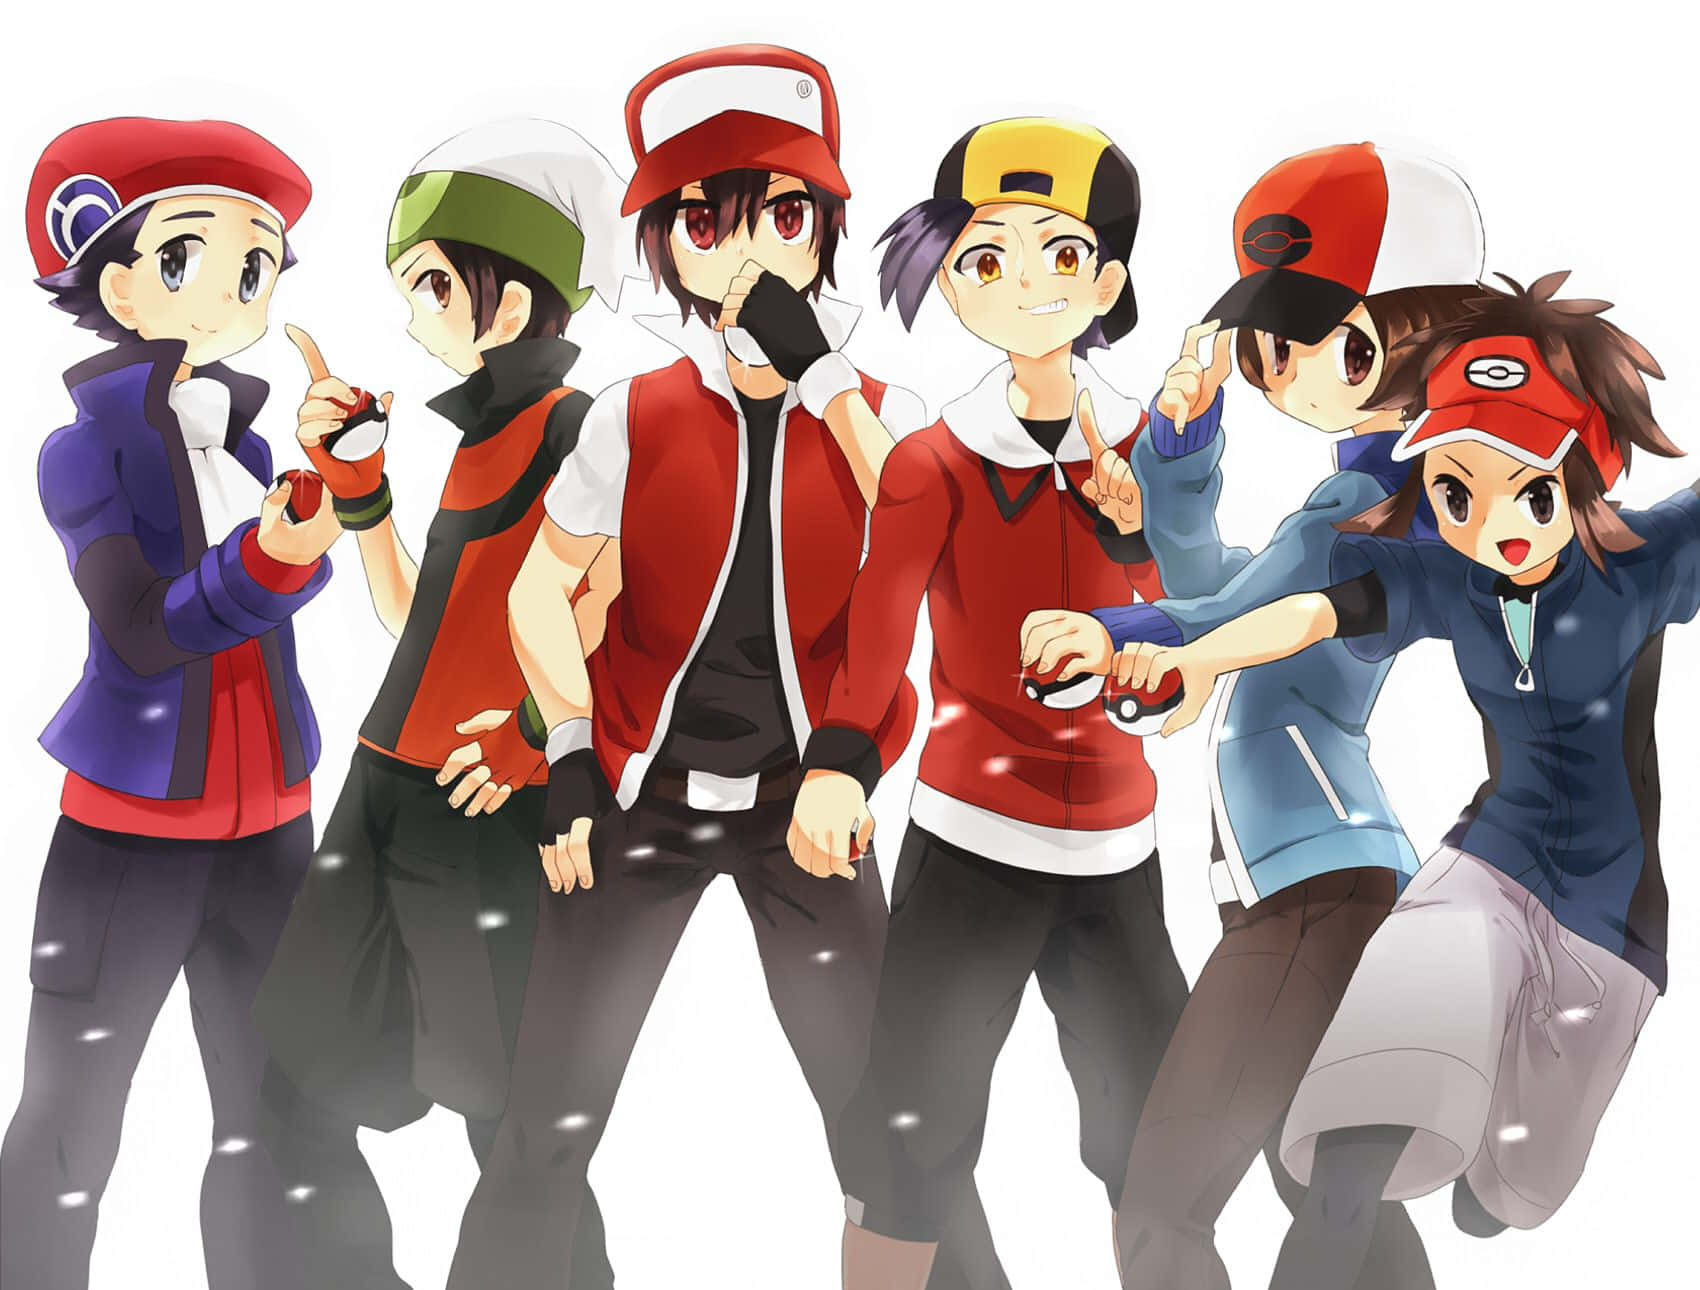 An ensemble of Pokemon characters assembled for an epic adventure Wallpaper